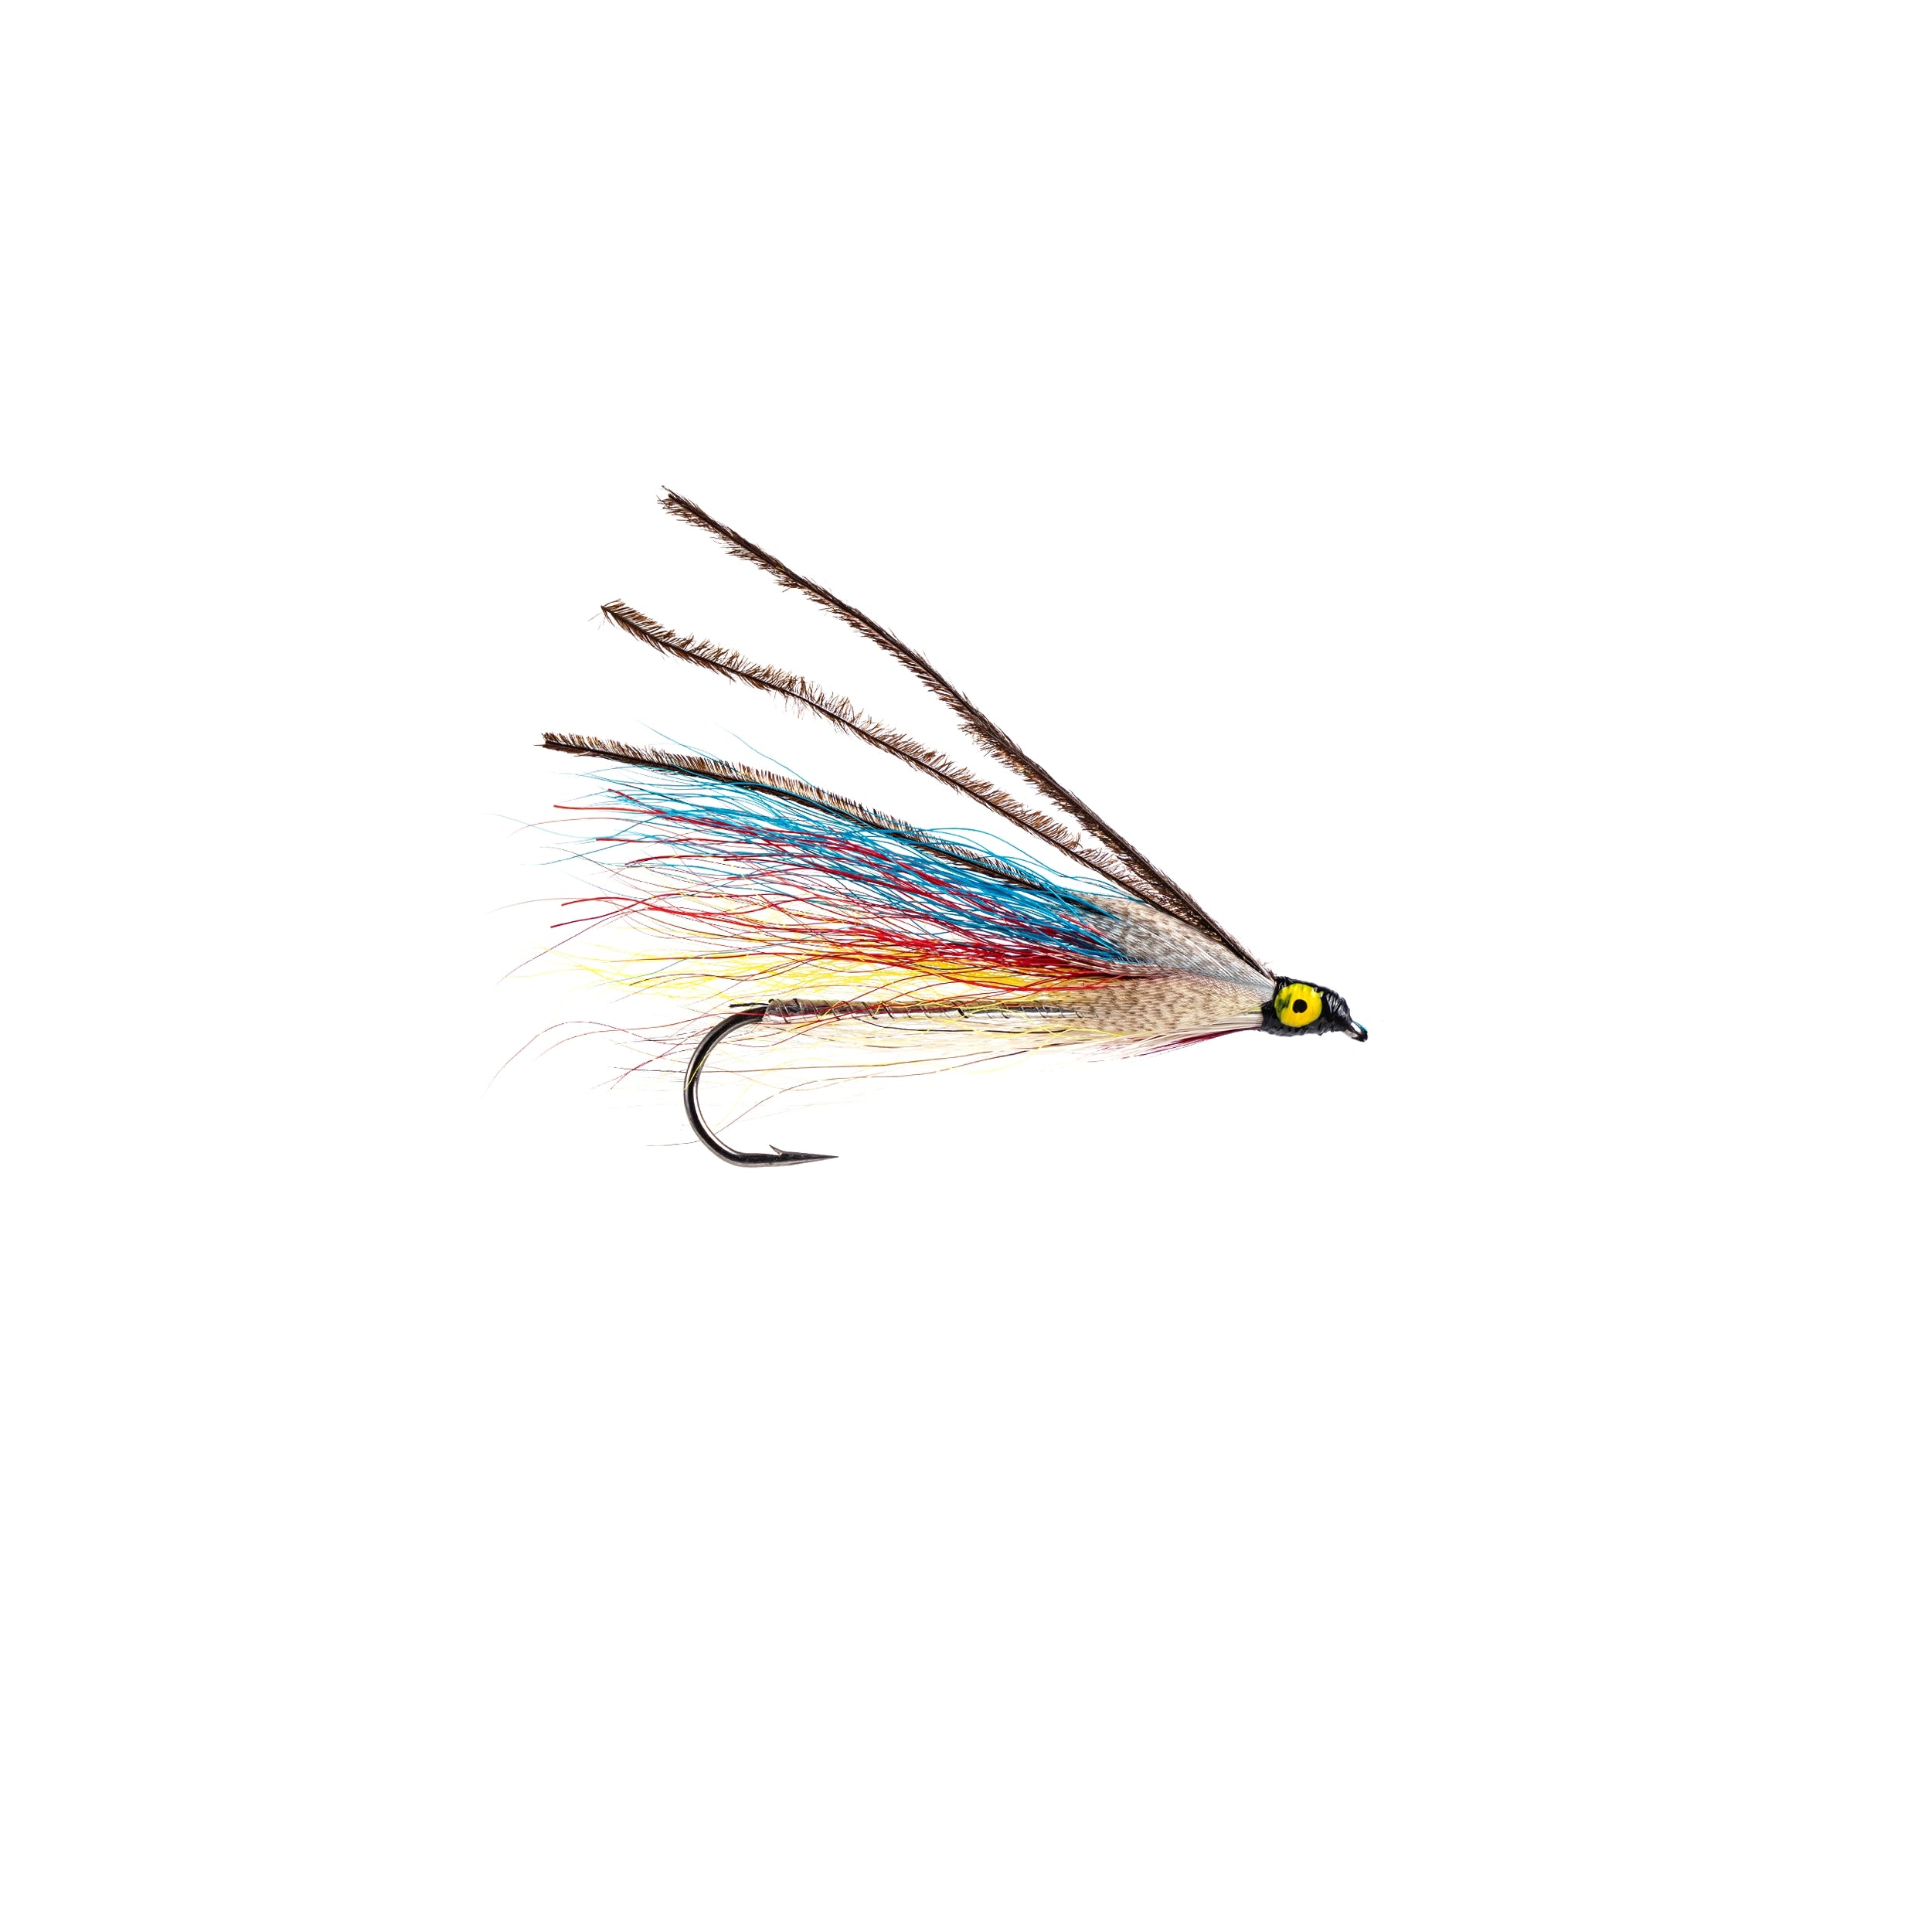 Check out our wide range of high quality Mouches Neptune Flies